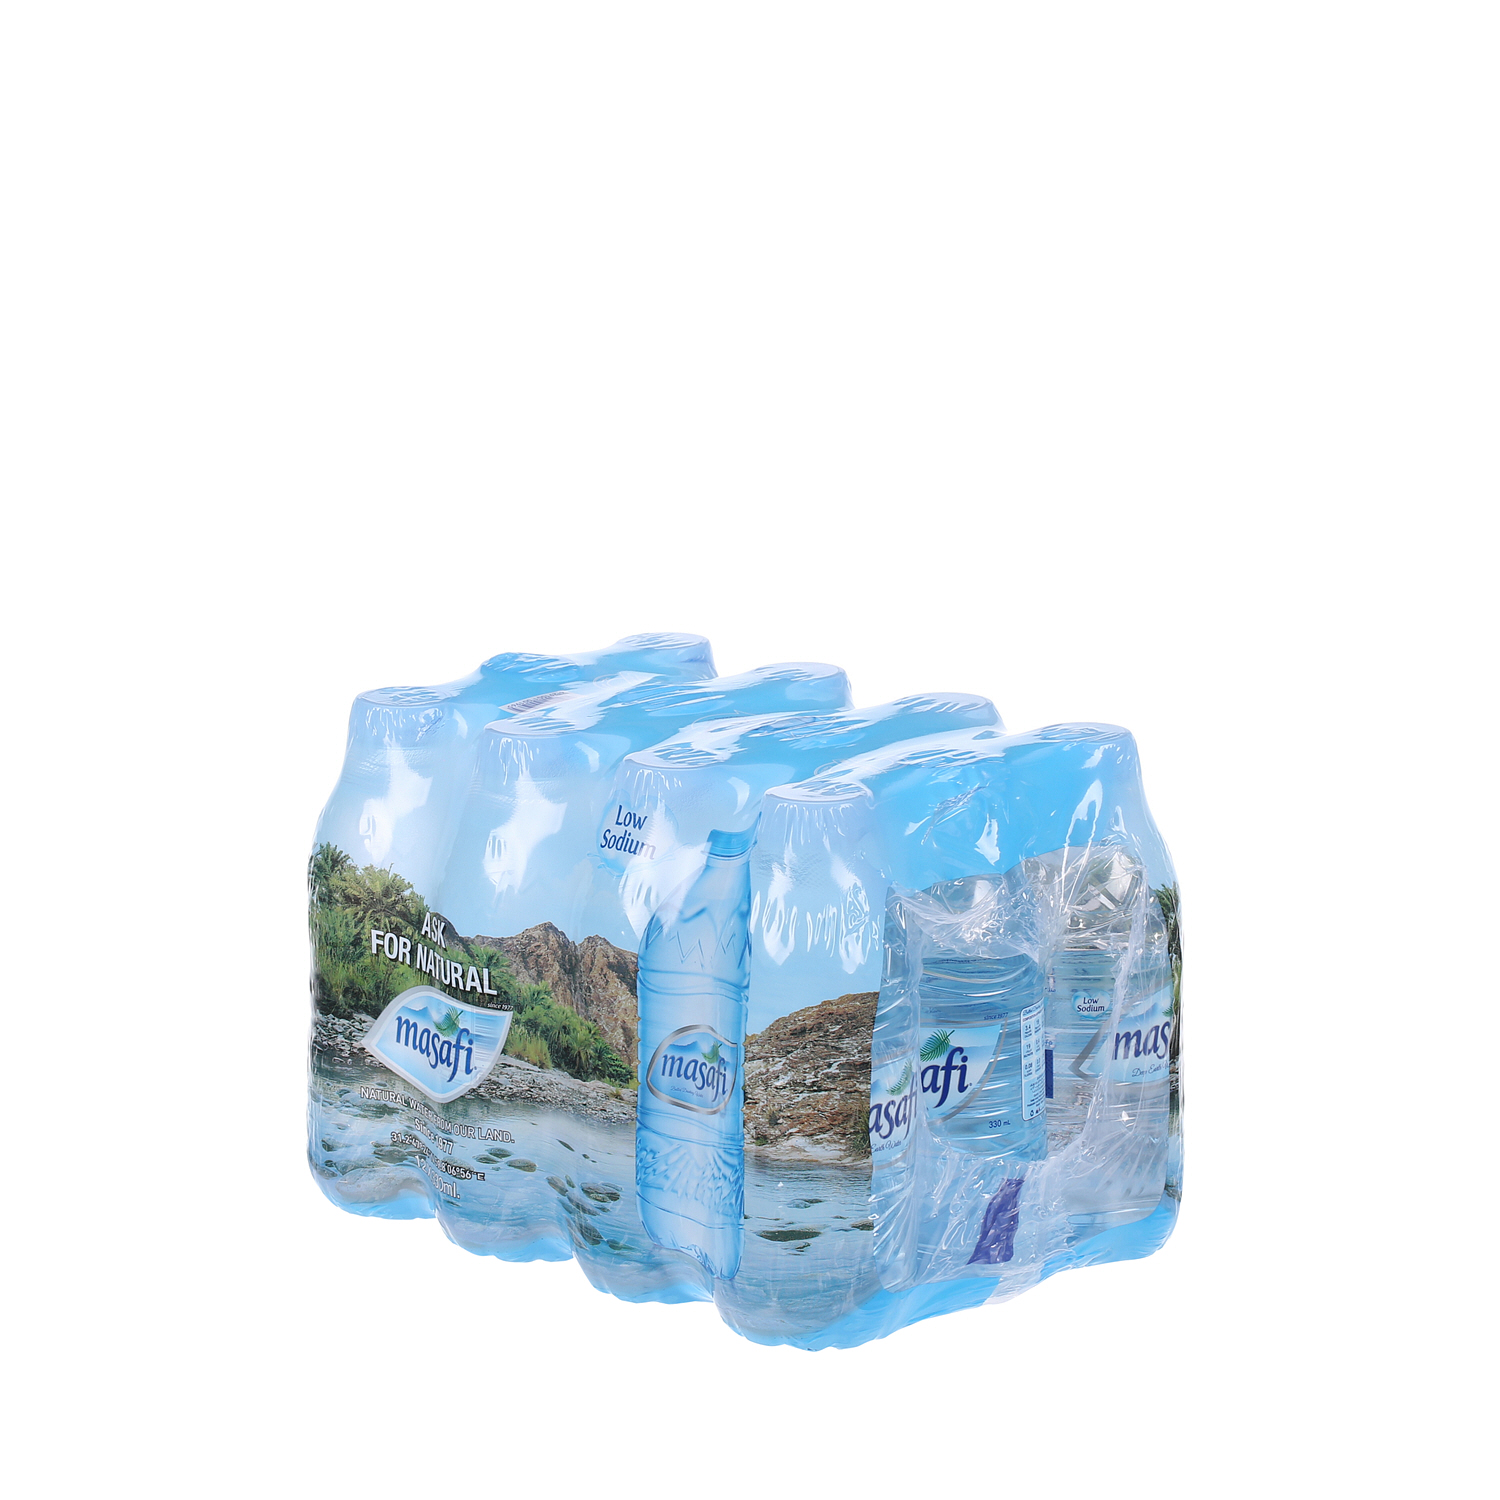 Masafi Mineral Water 330 ml × 12 Pack